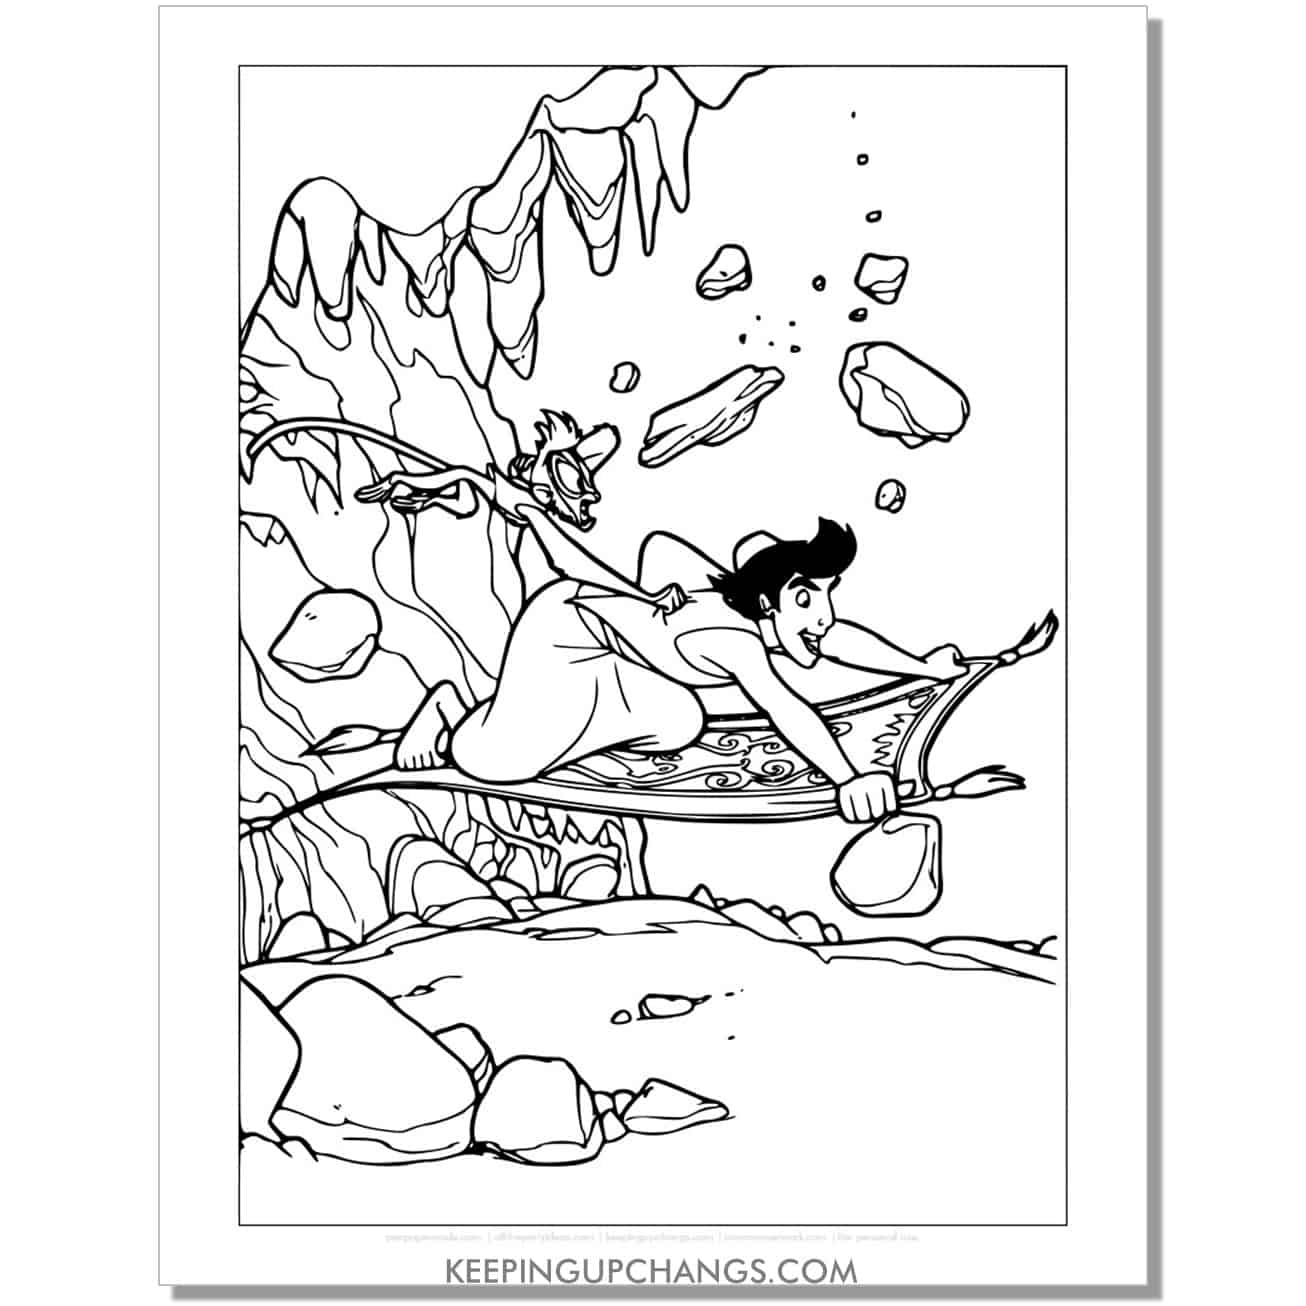 aladdin abu make it out of cave coloring page, sheet.